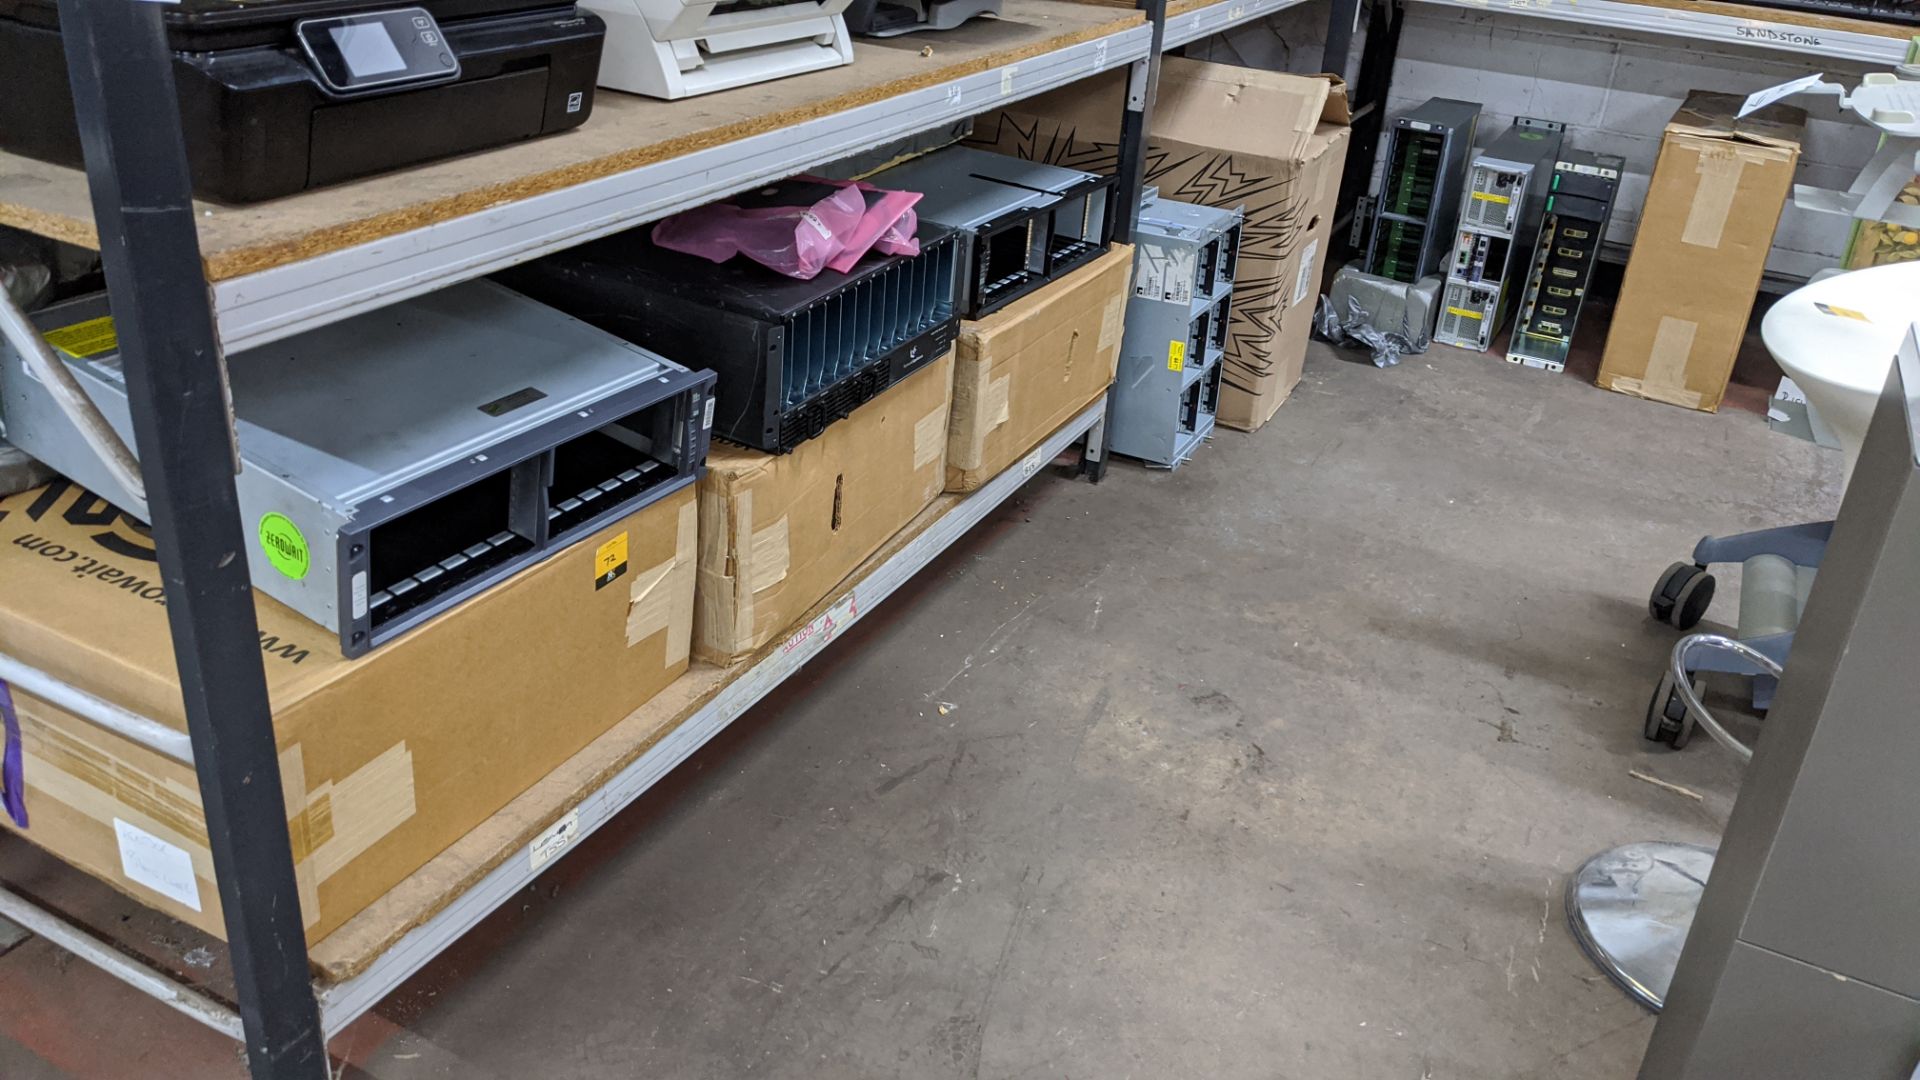 8 off assorted server & storage enclosures. IMPORTANT: Please remember goods successfully bid upon